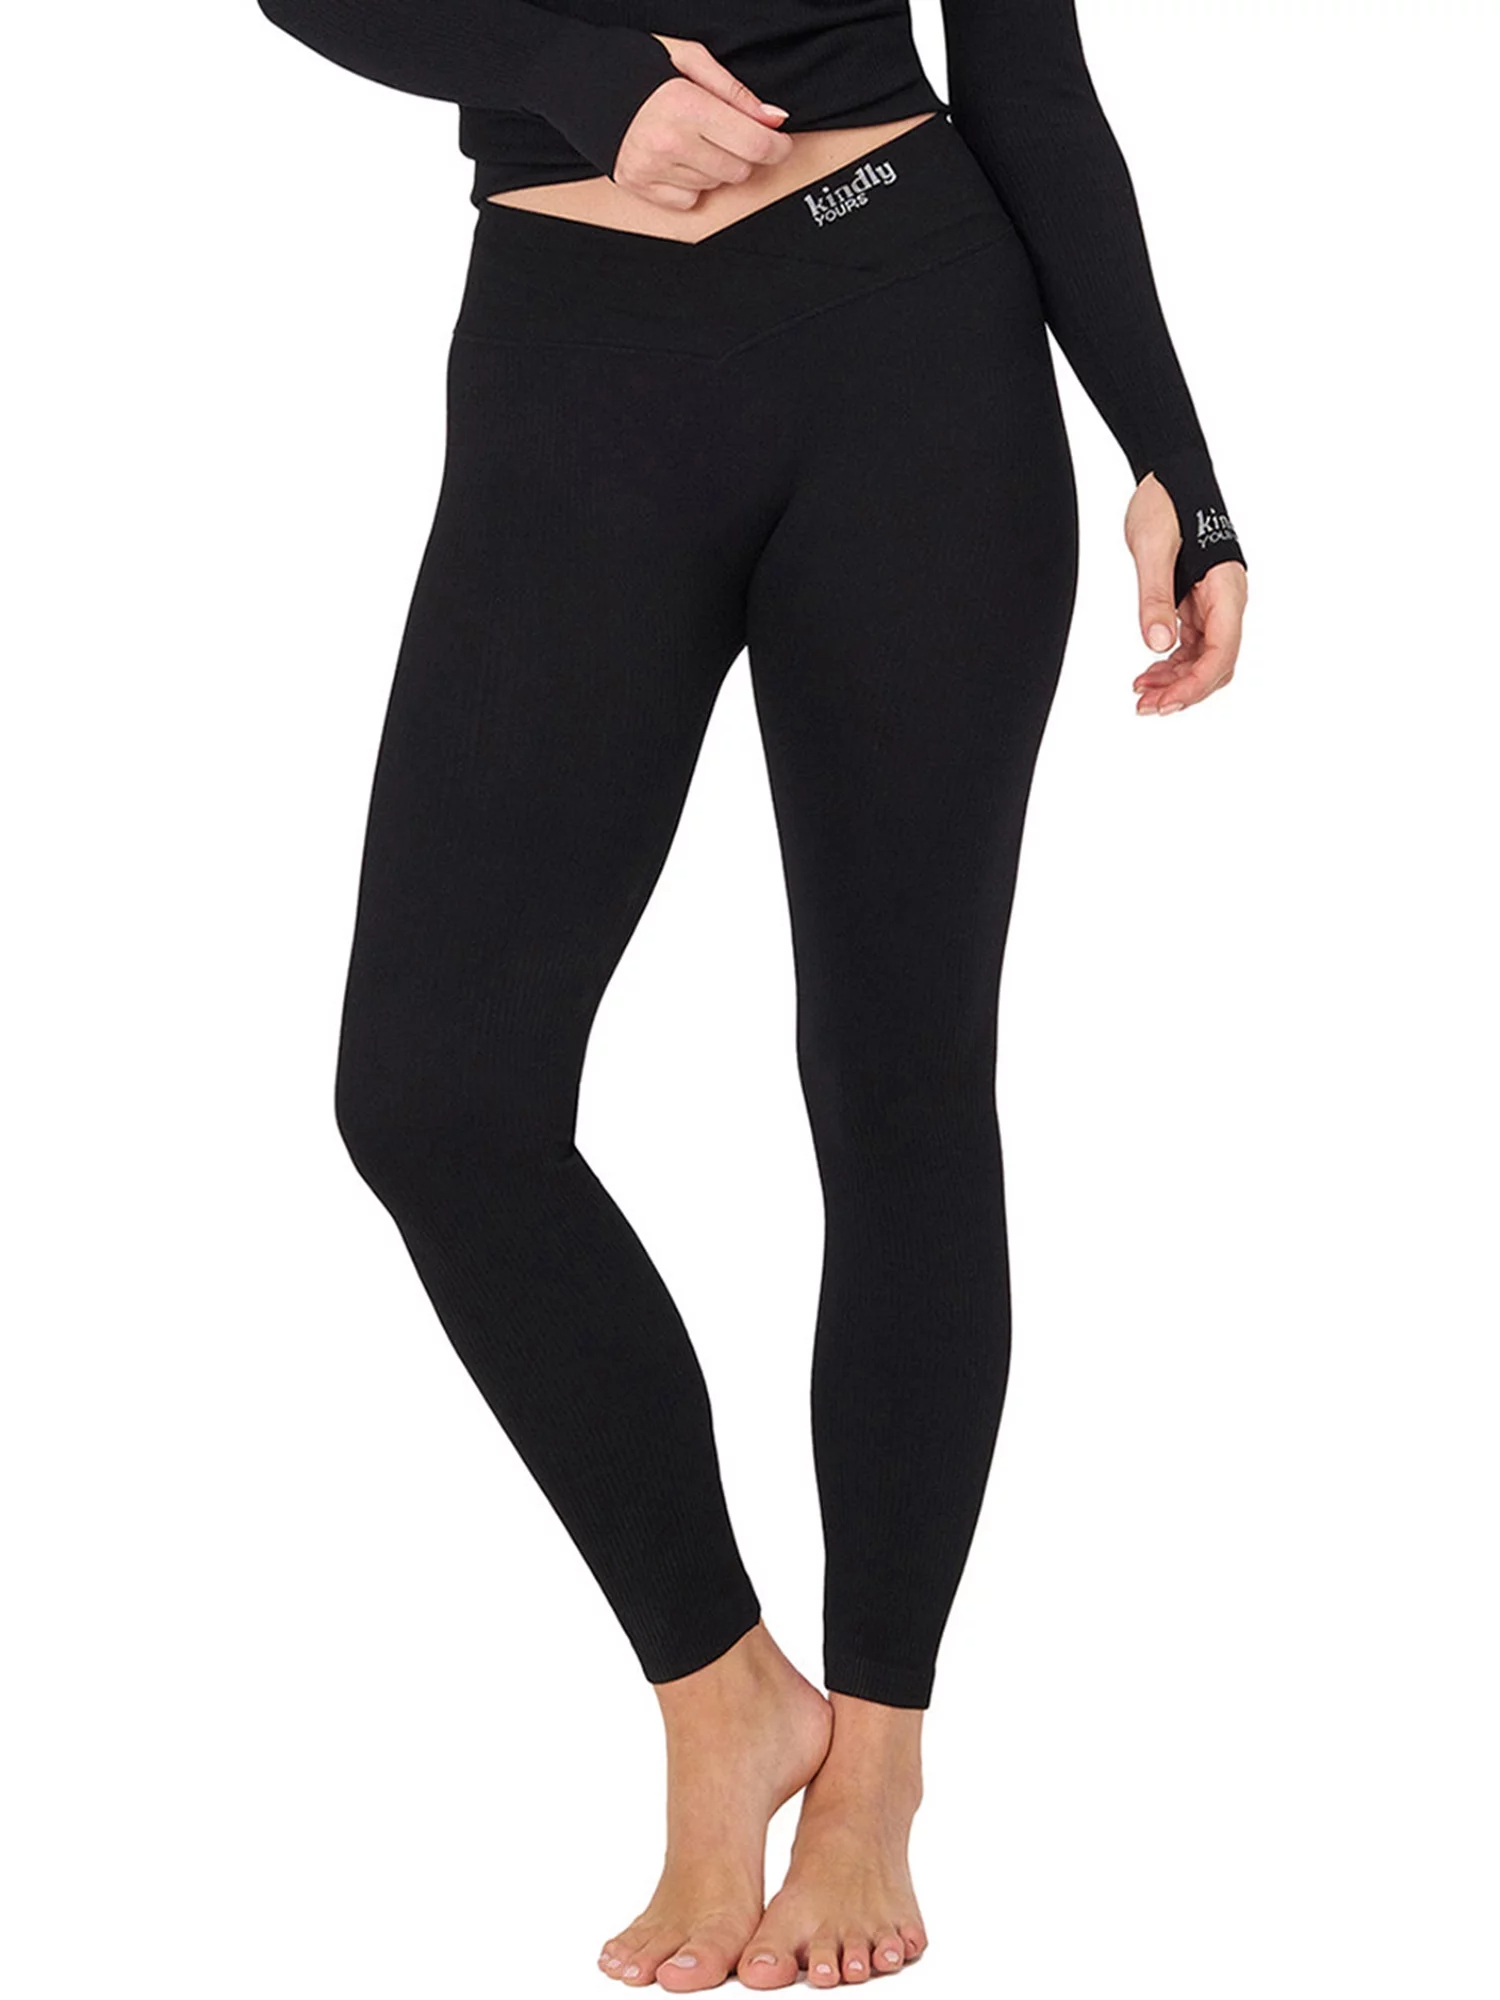 Thermal leggings women are essential cold-weather wardrobe staples that provide warmth, comfort, and style.